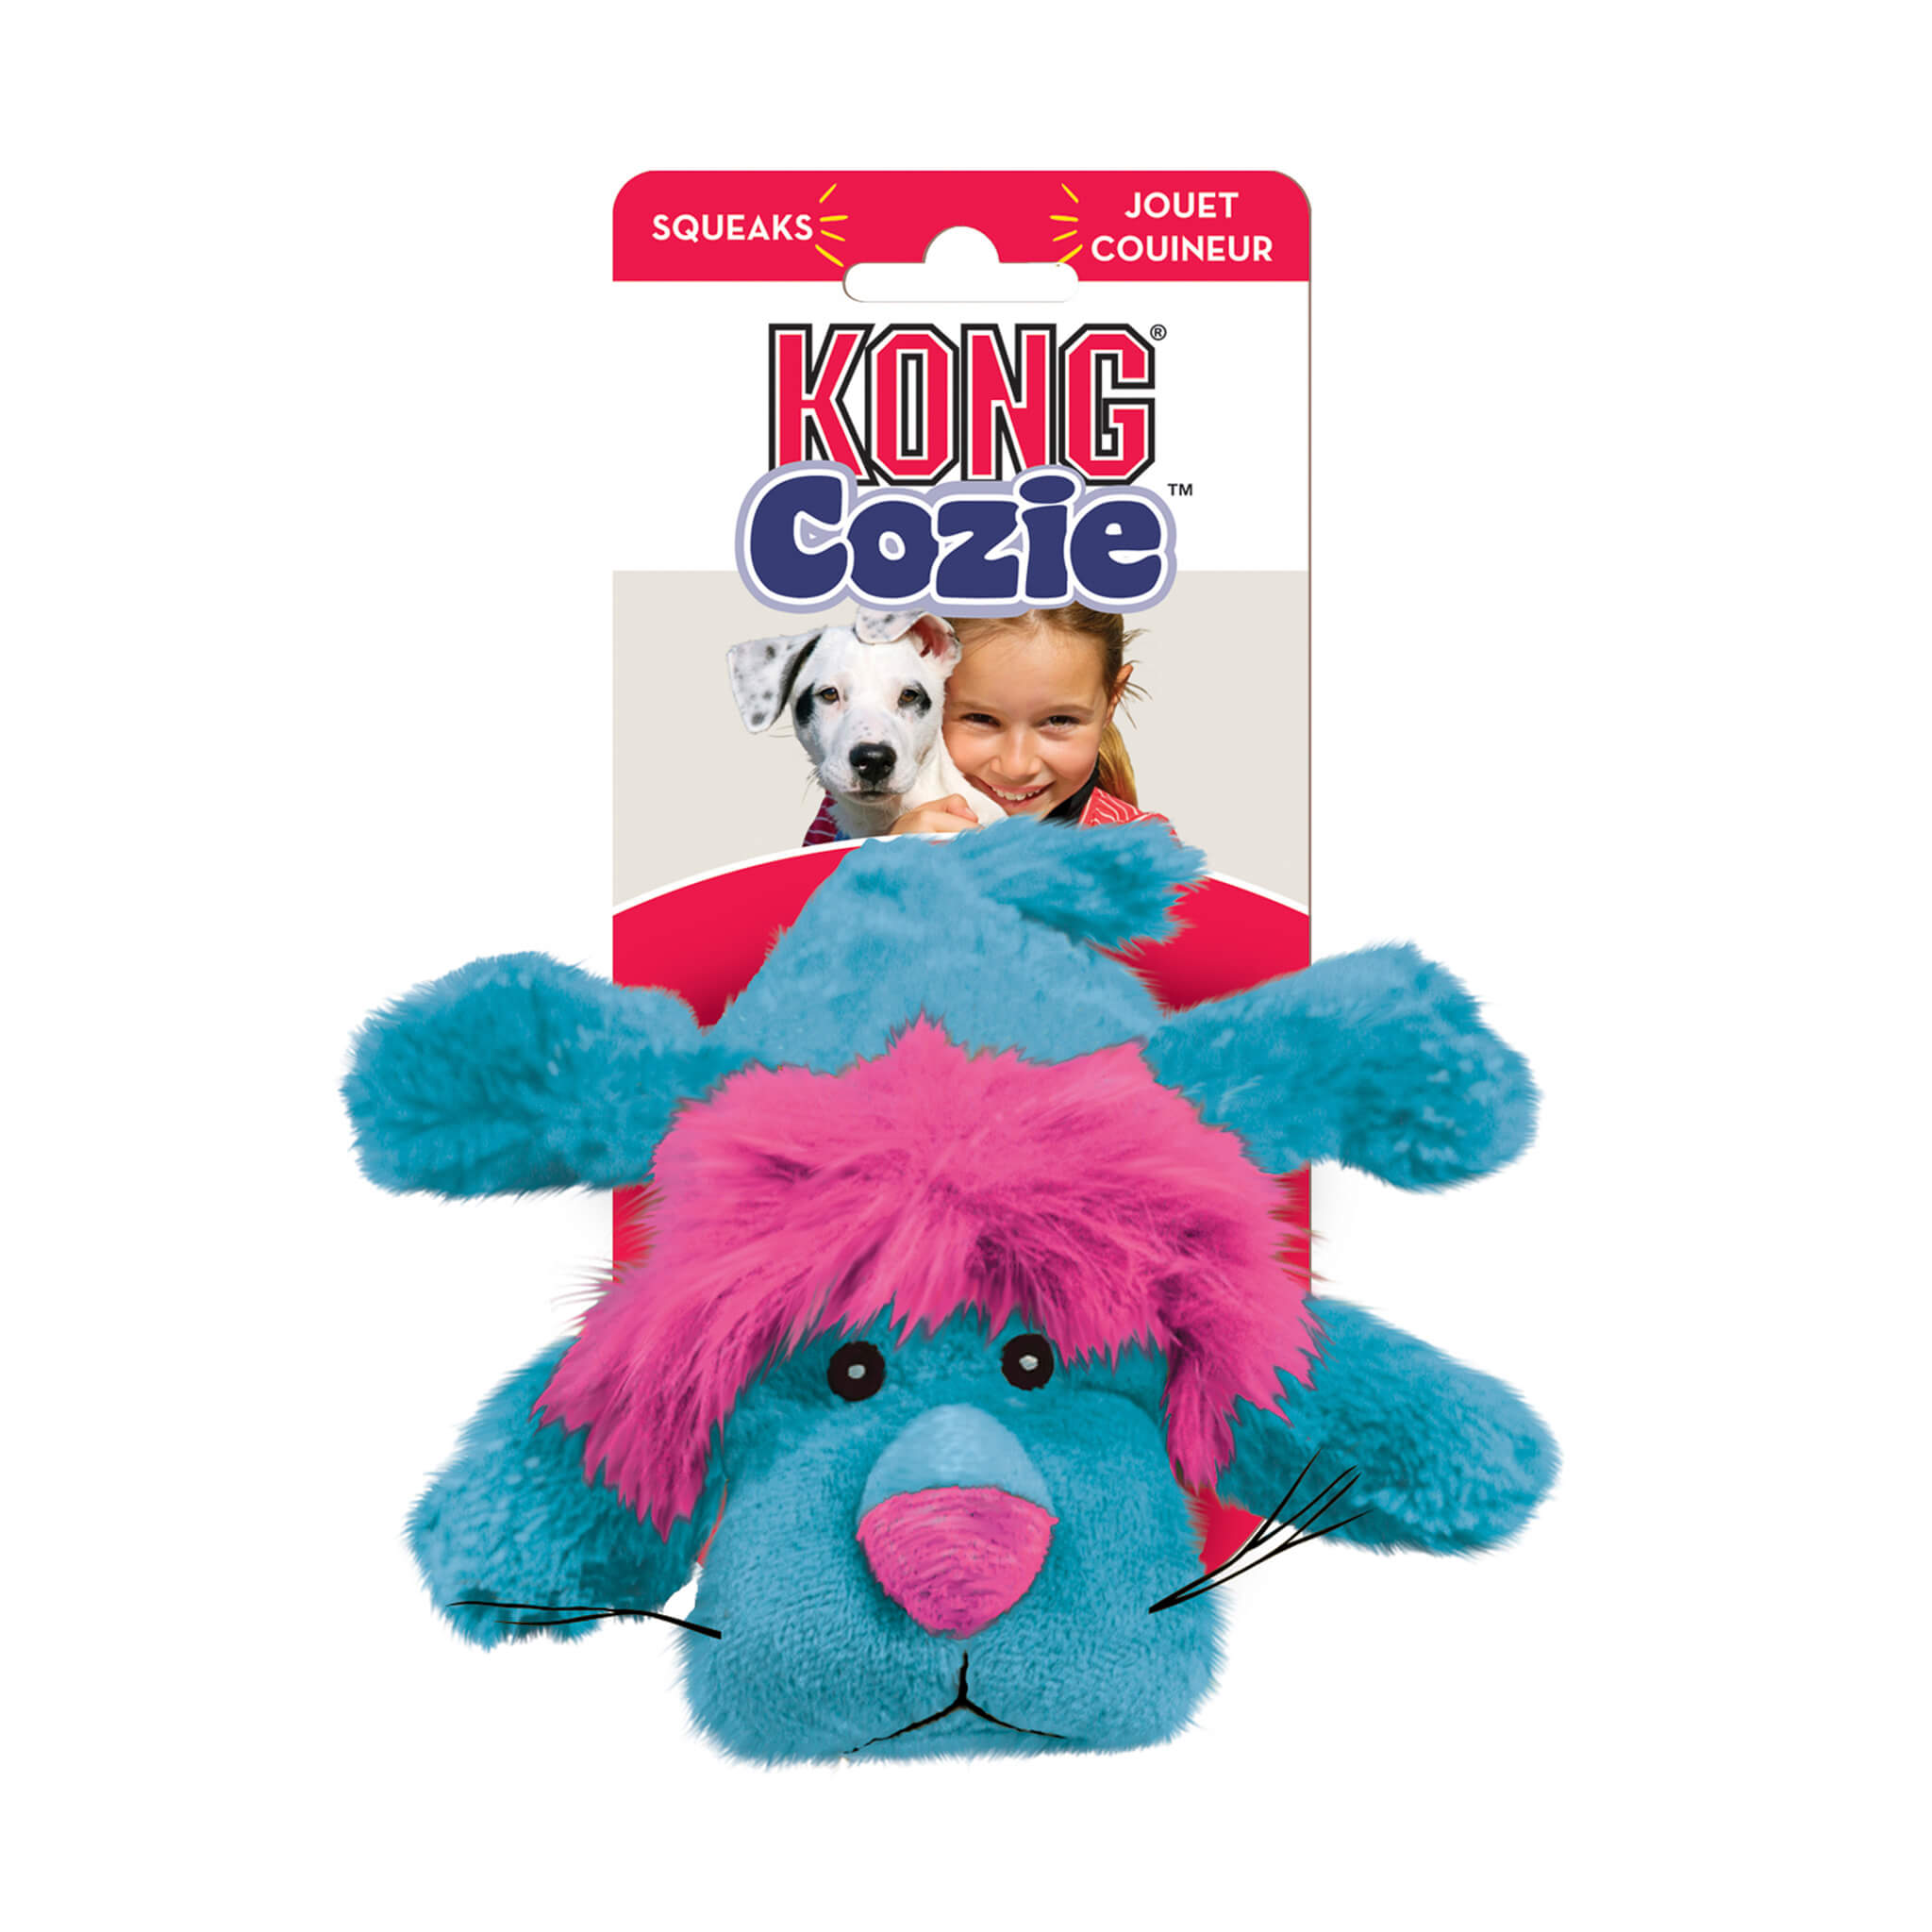 Kong dog toy - cozie king lion